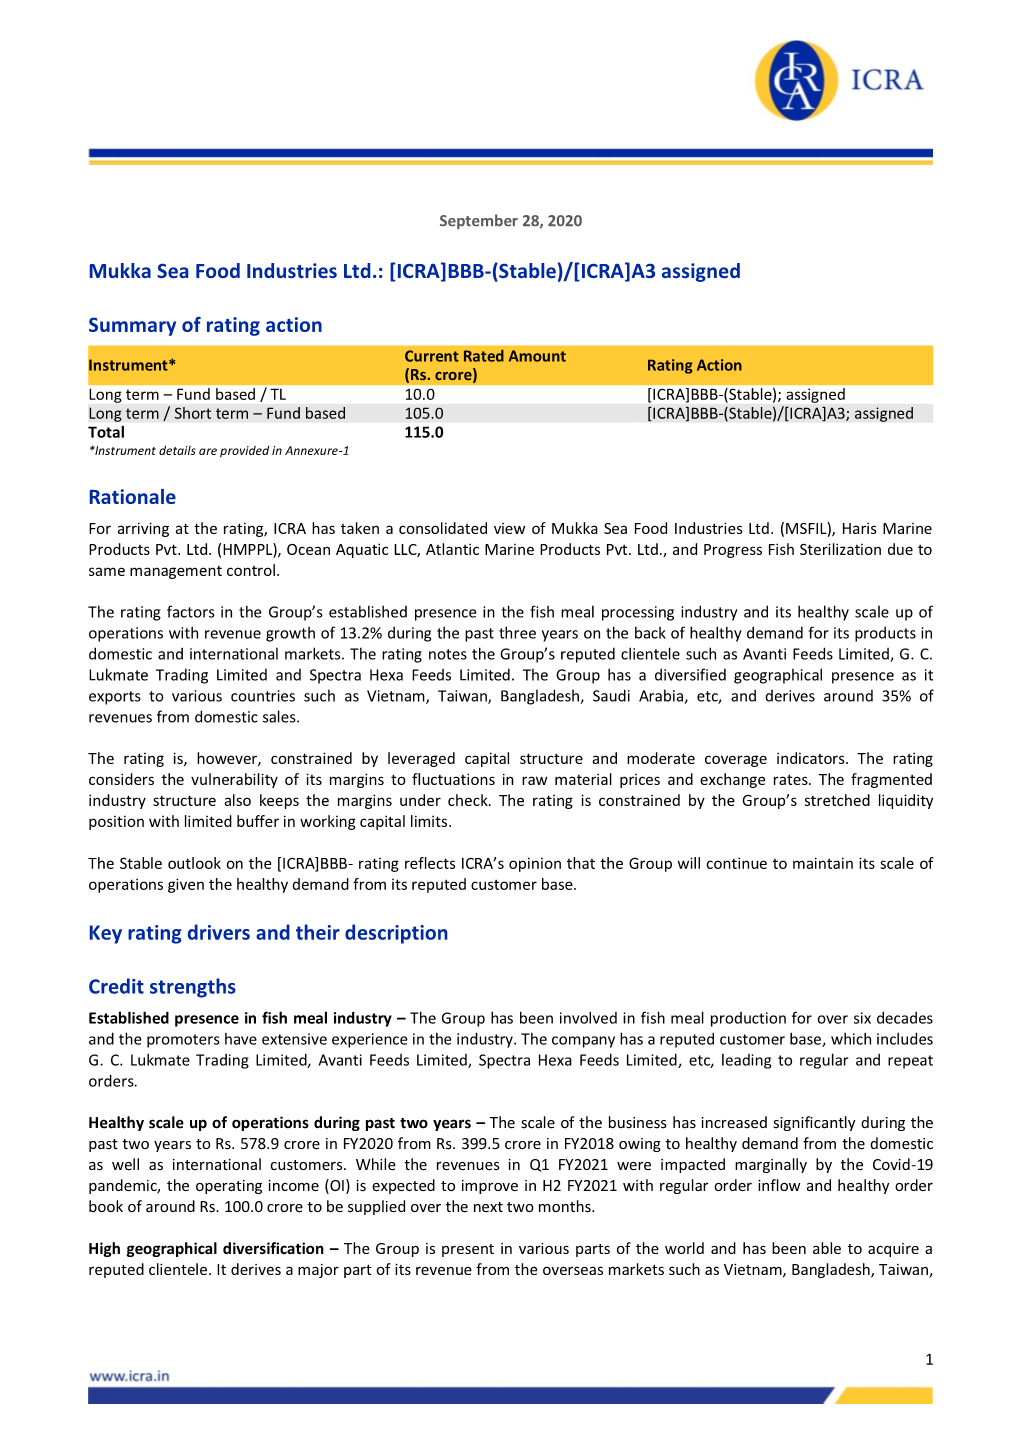 Mukka Sea Food Industries Ltd.: [ICRA]BBB-(Stable)/[ICRA]A3 Assigned